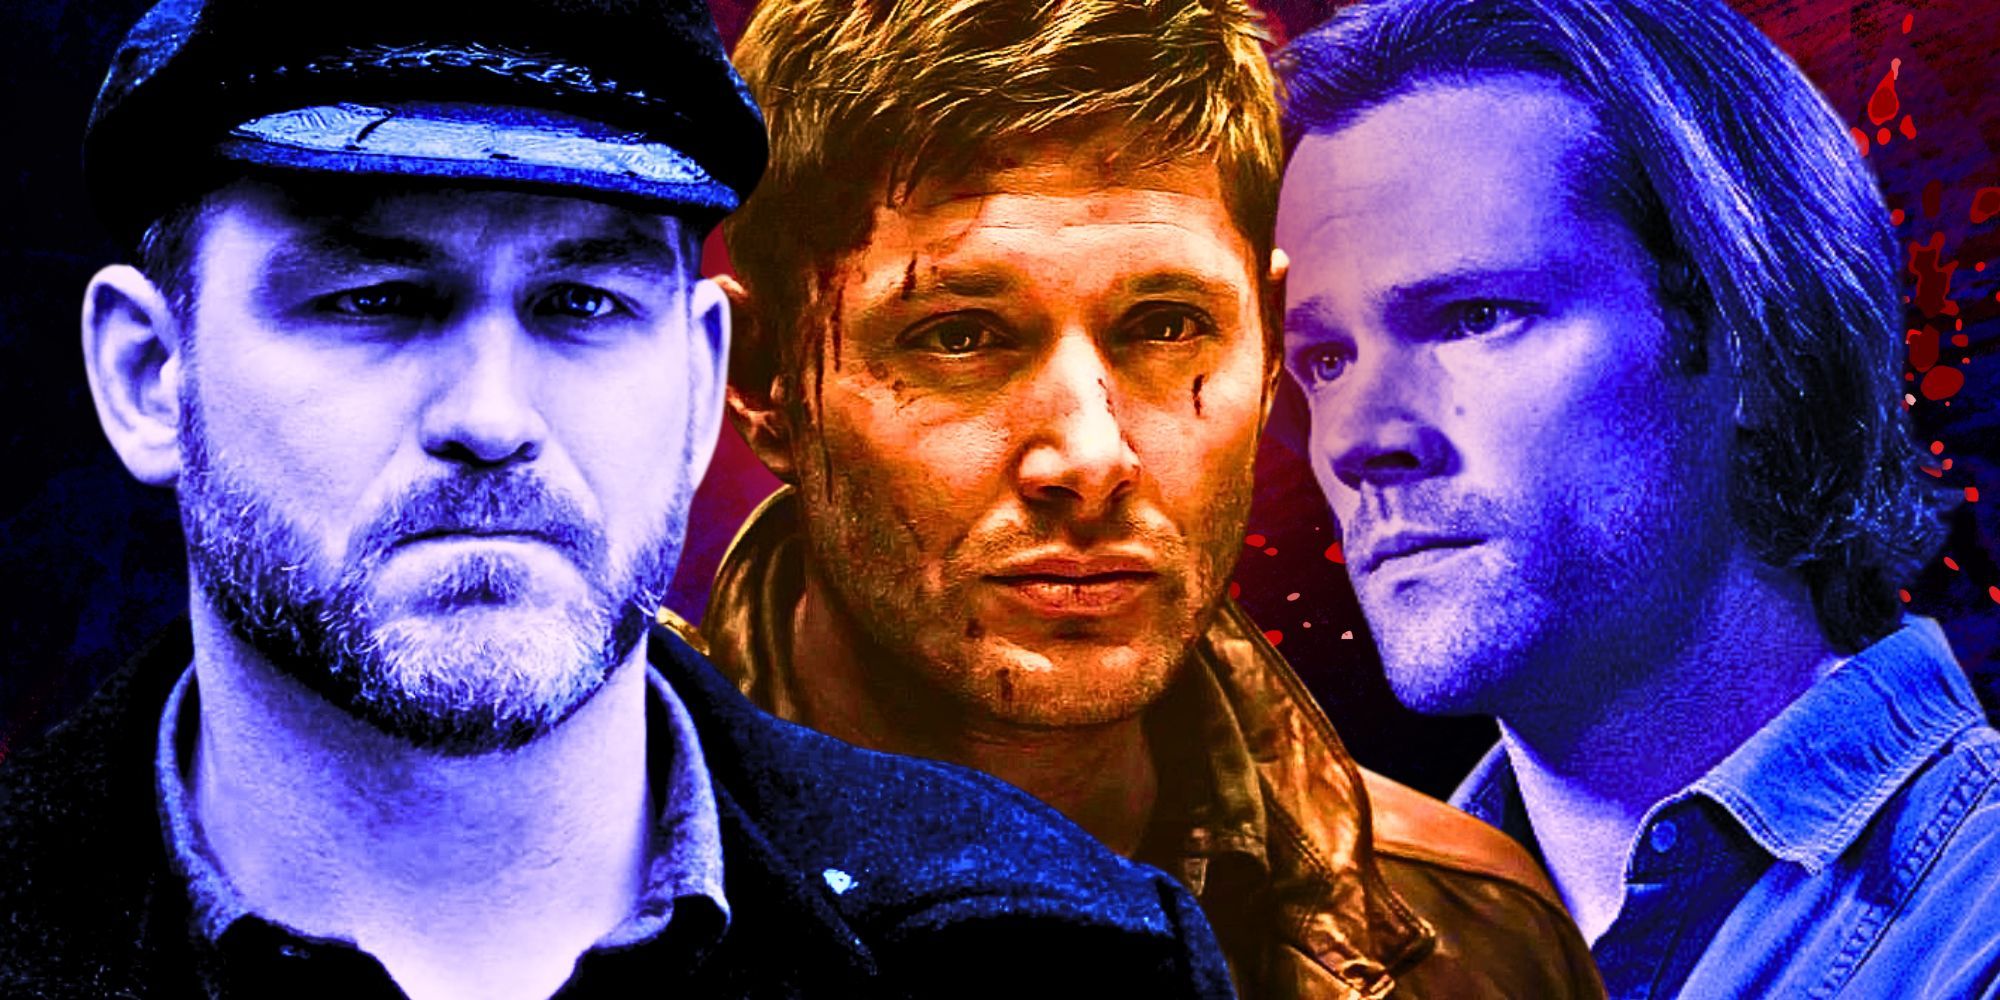 Custom image of Benny, Dean, and Sam in Supernatural with Benny and Sam in blue coloring